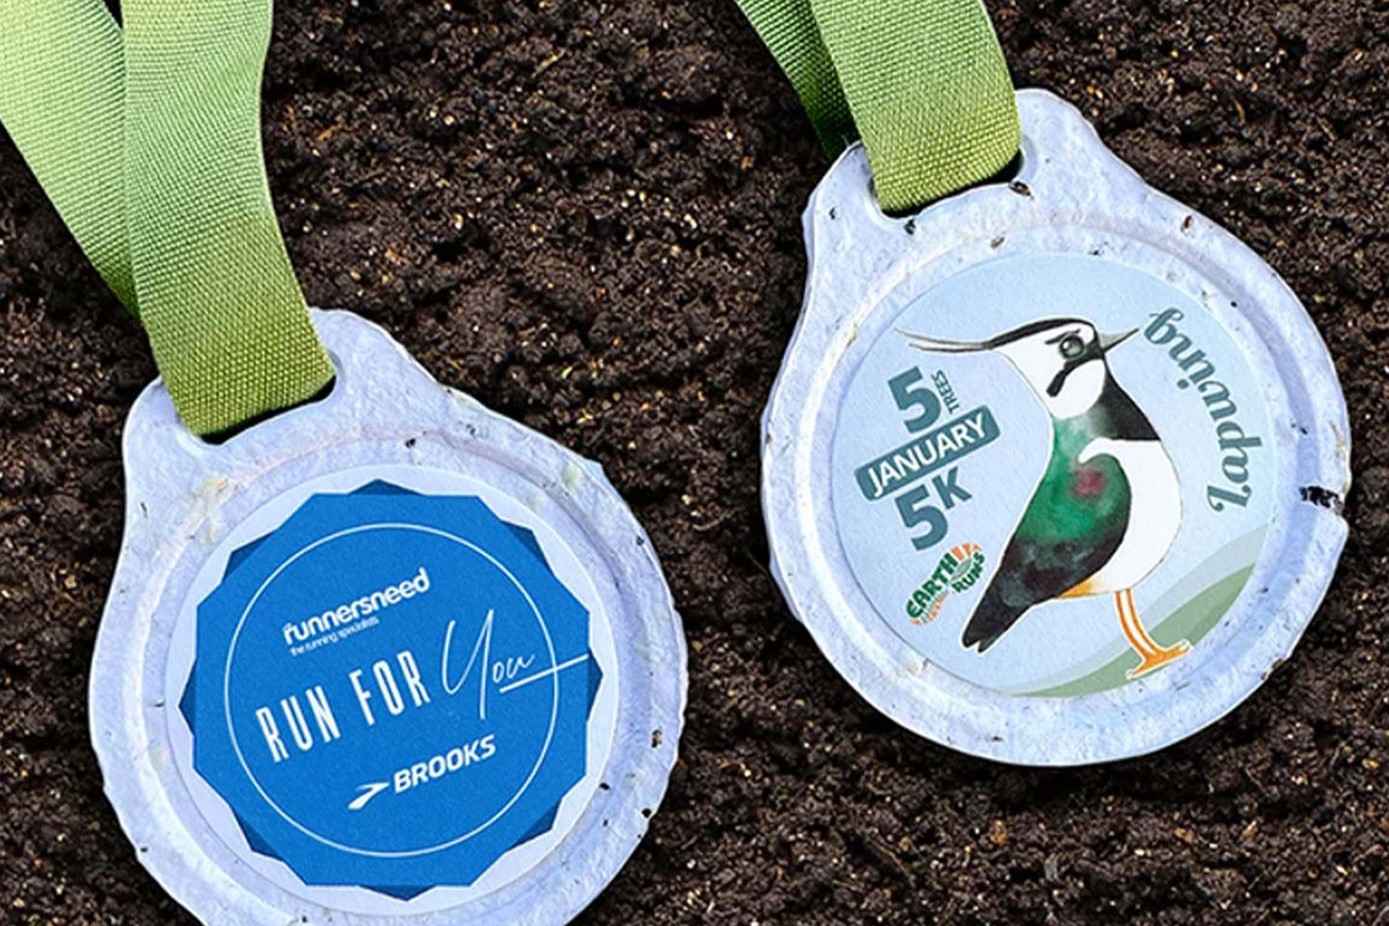 Biodegradable flower seed and newspaper medals being planted in soil.